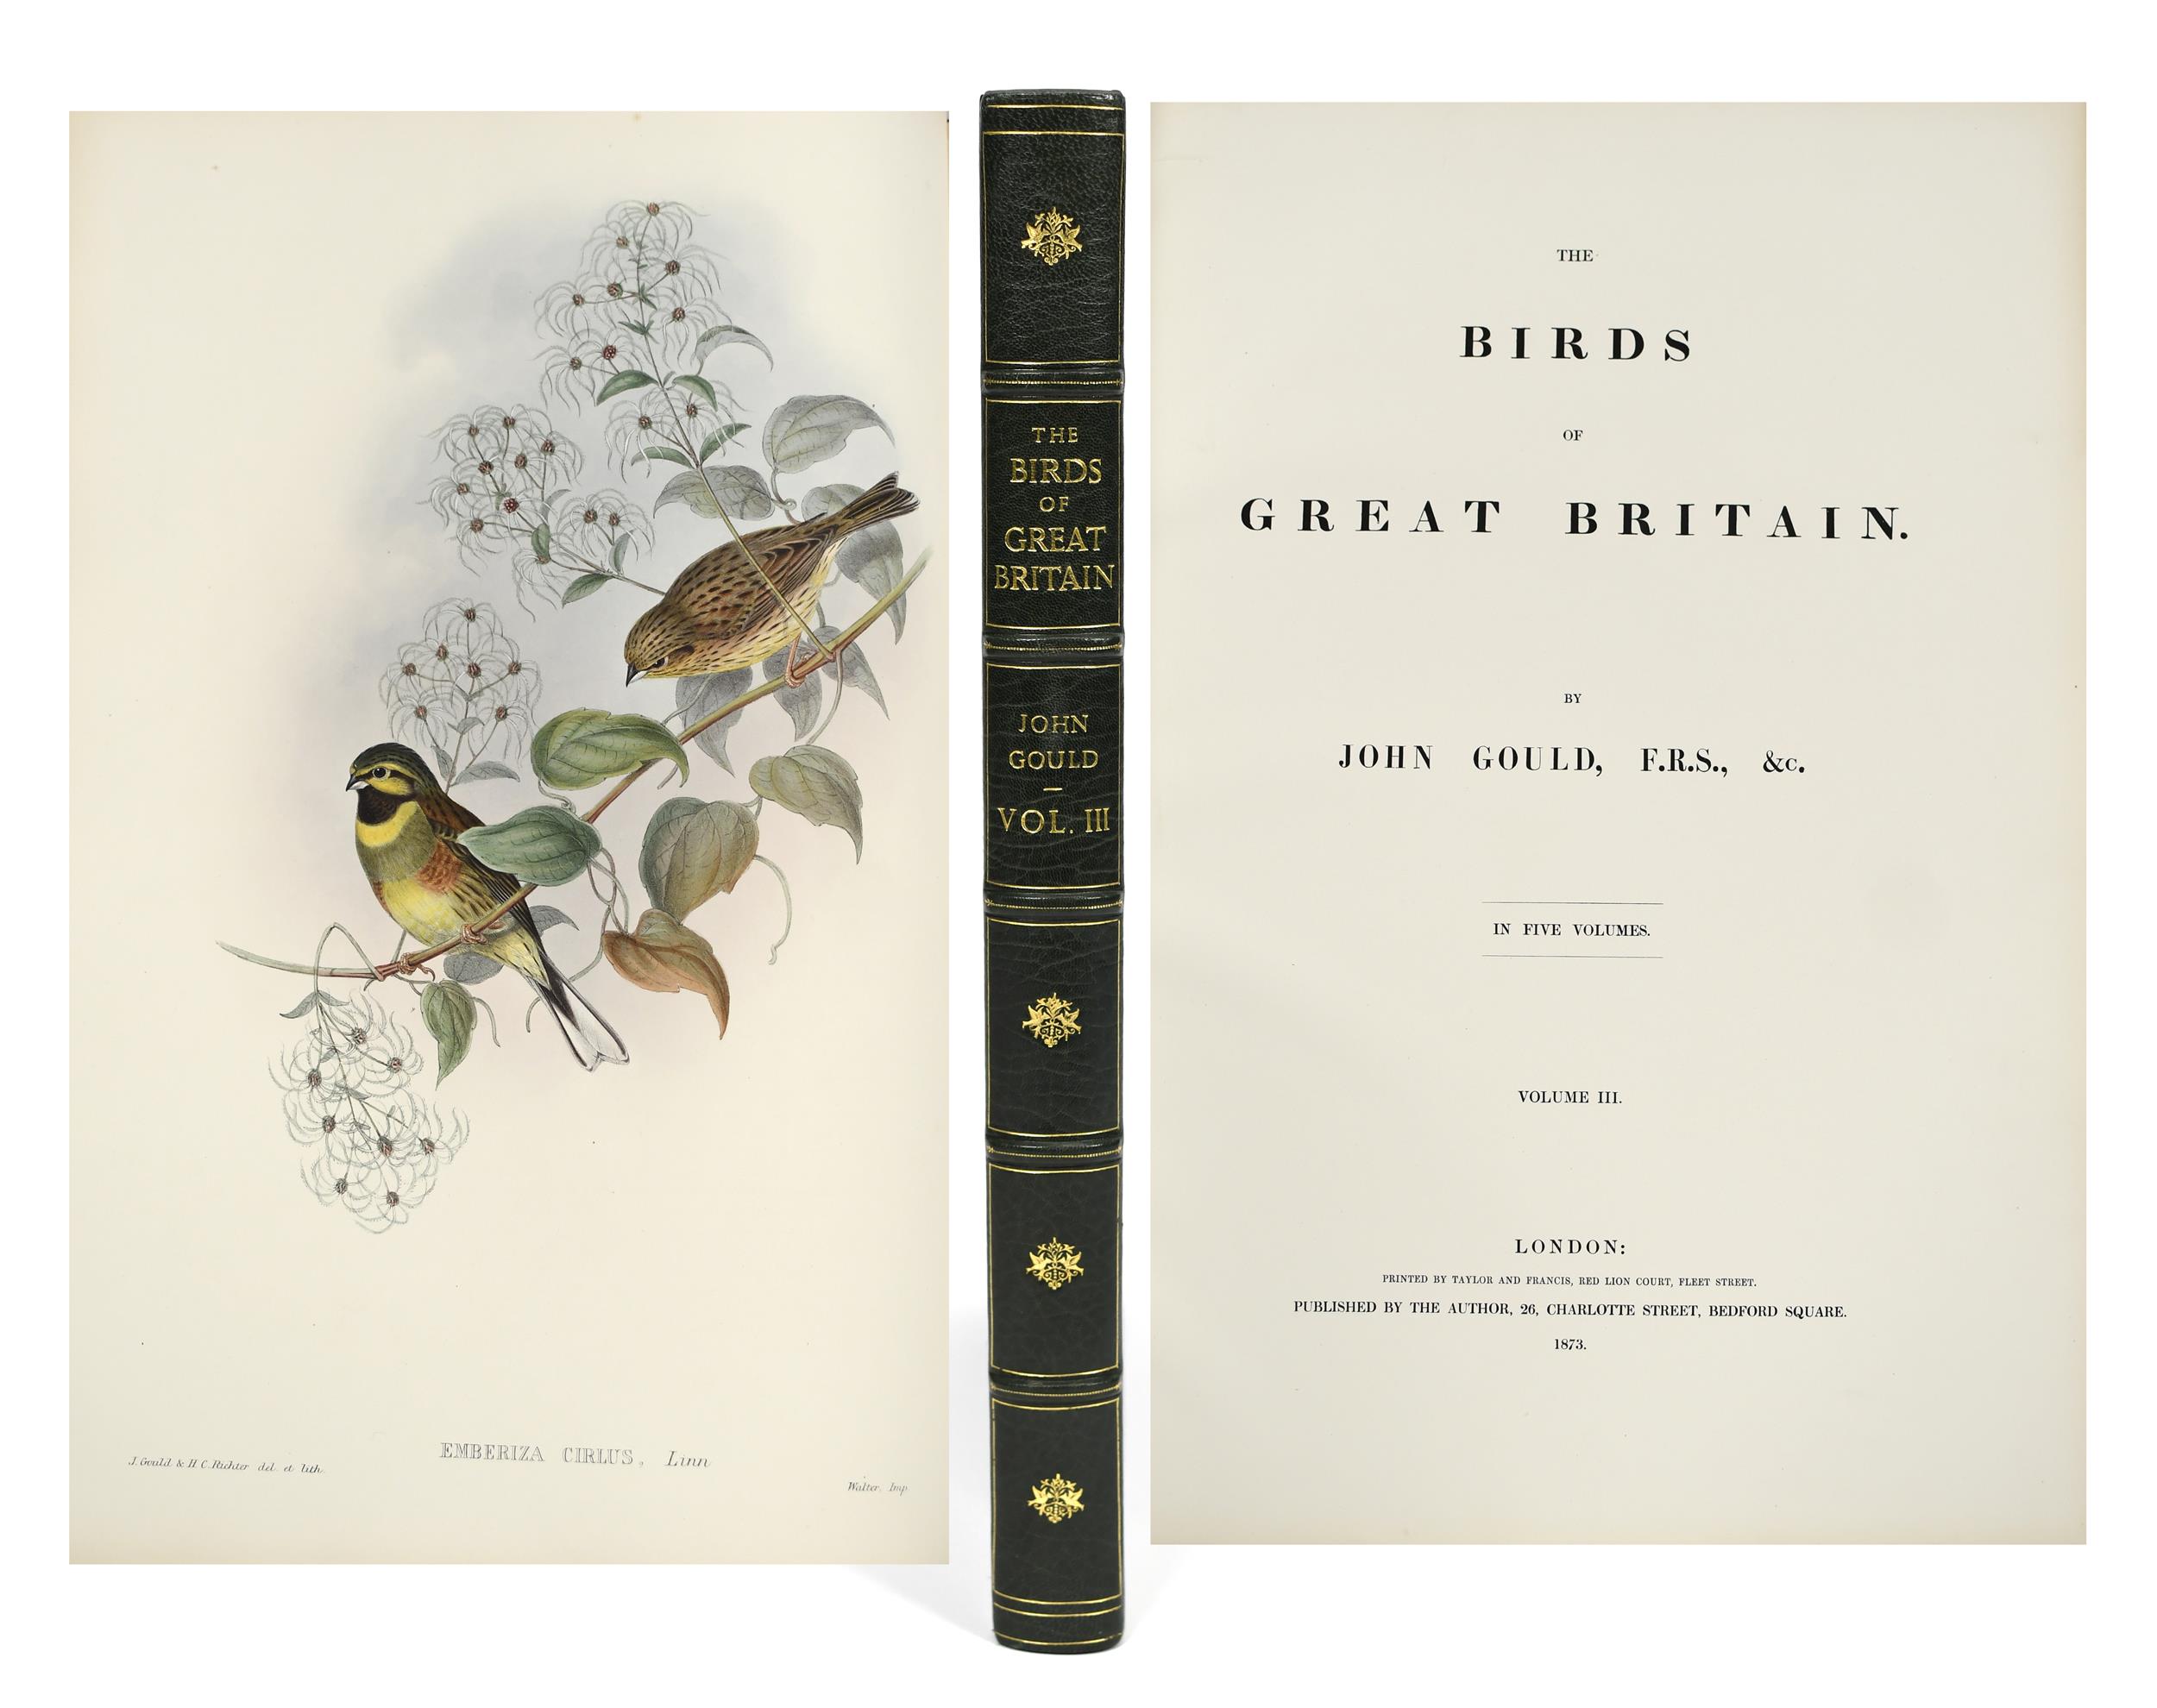 JOHN GOULDS, THE BIRDS OF GREAT